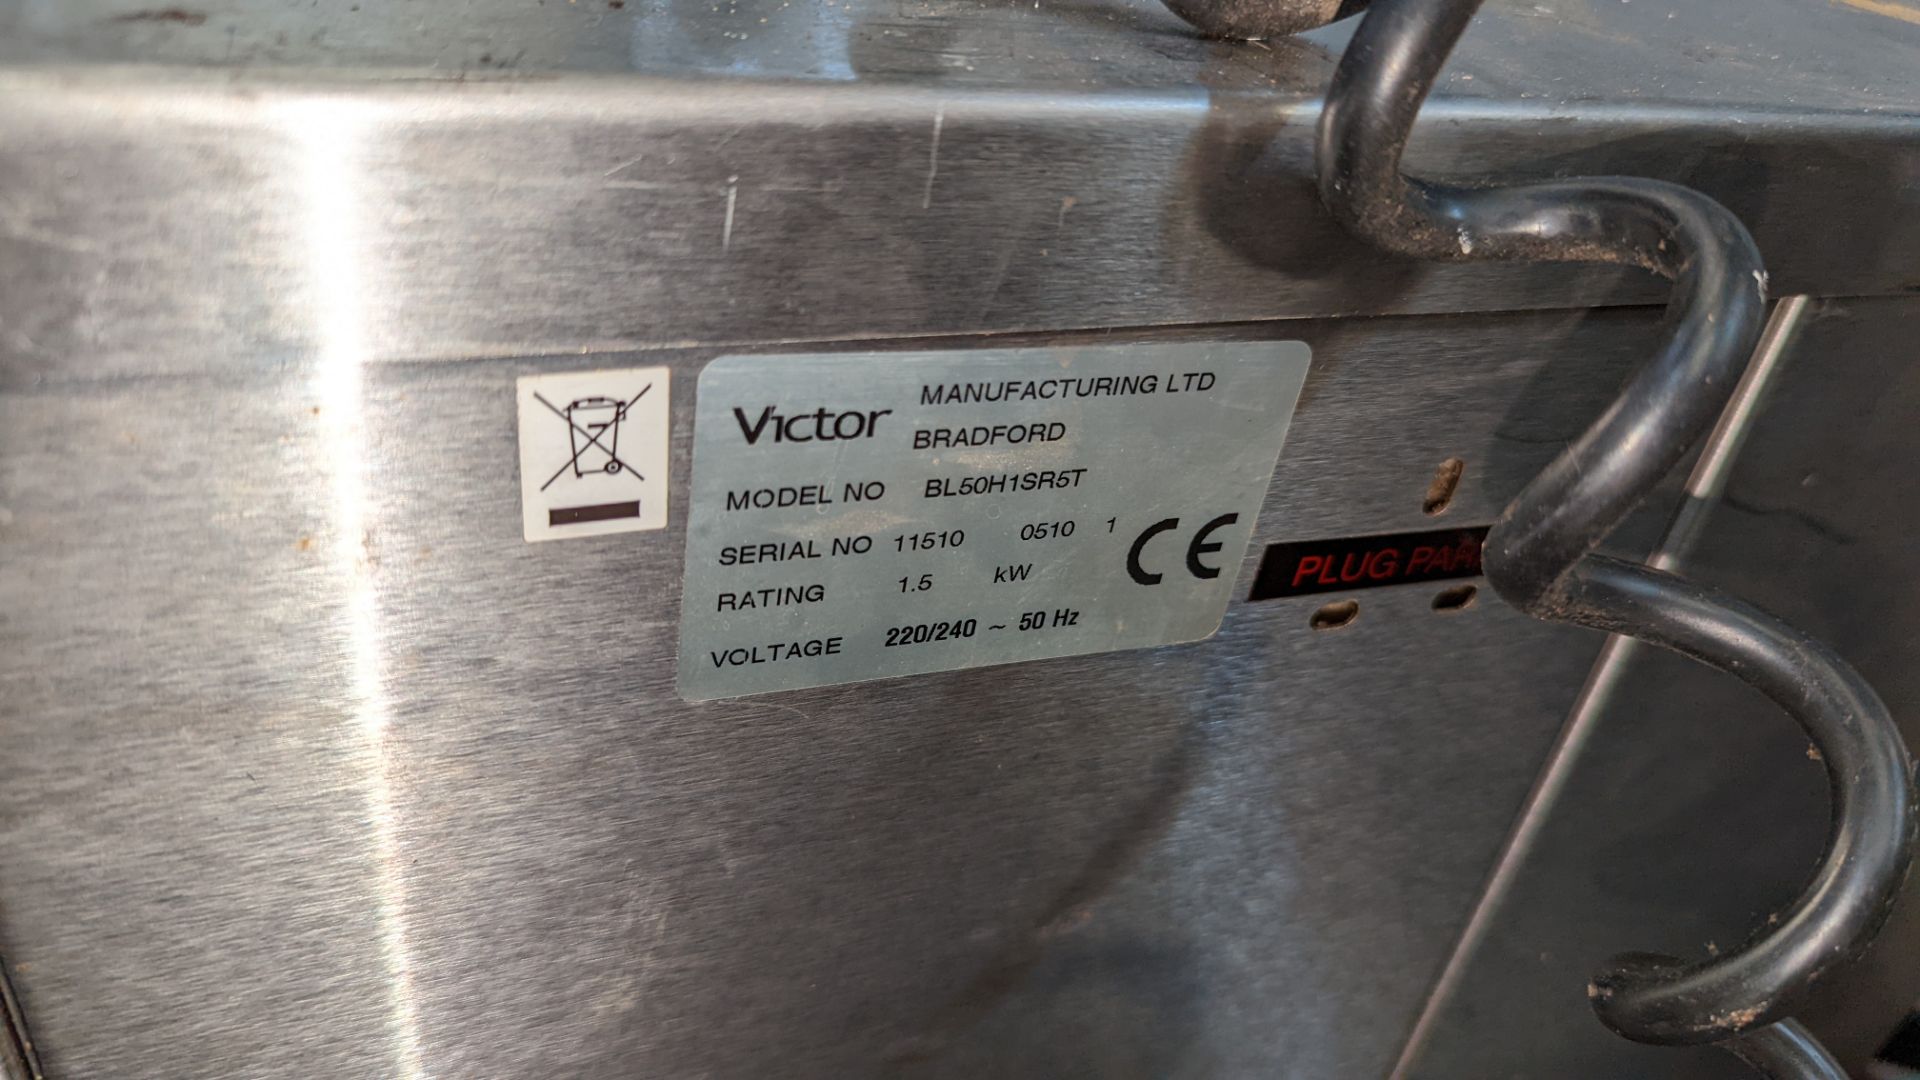 Victor stainless steel warming cupboard - Image 7 of 7